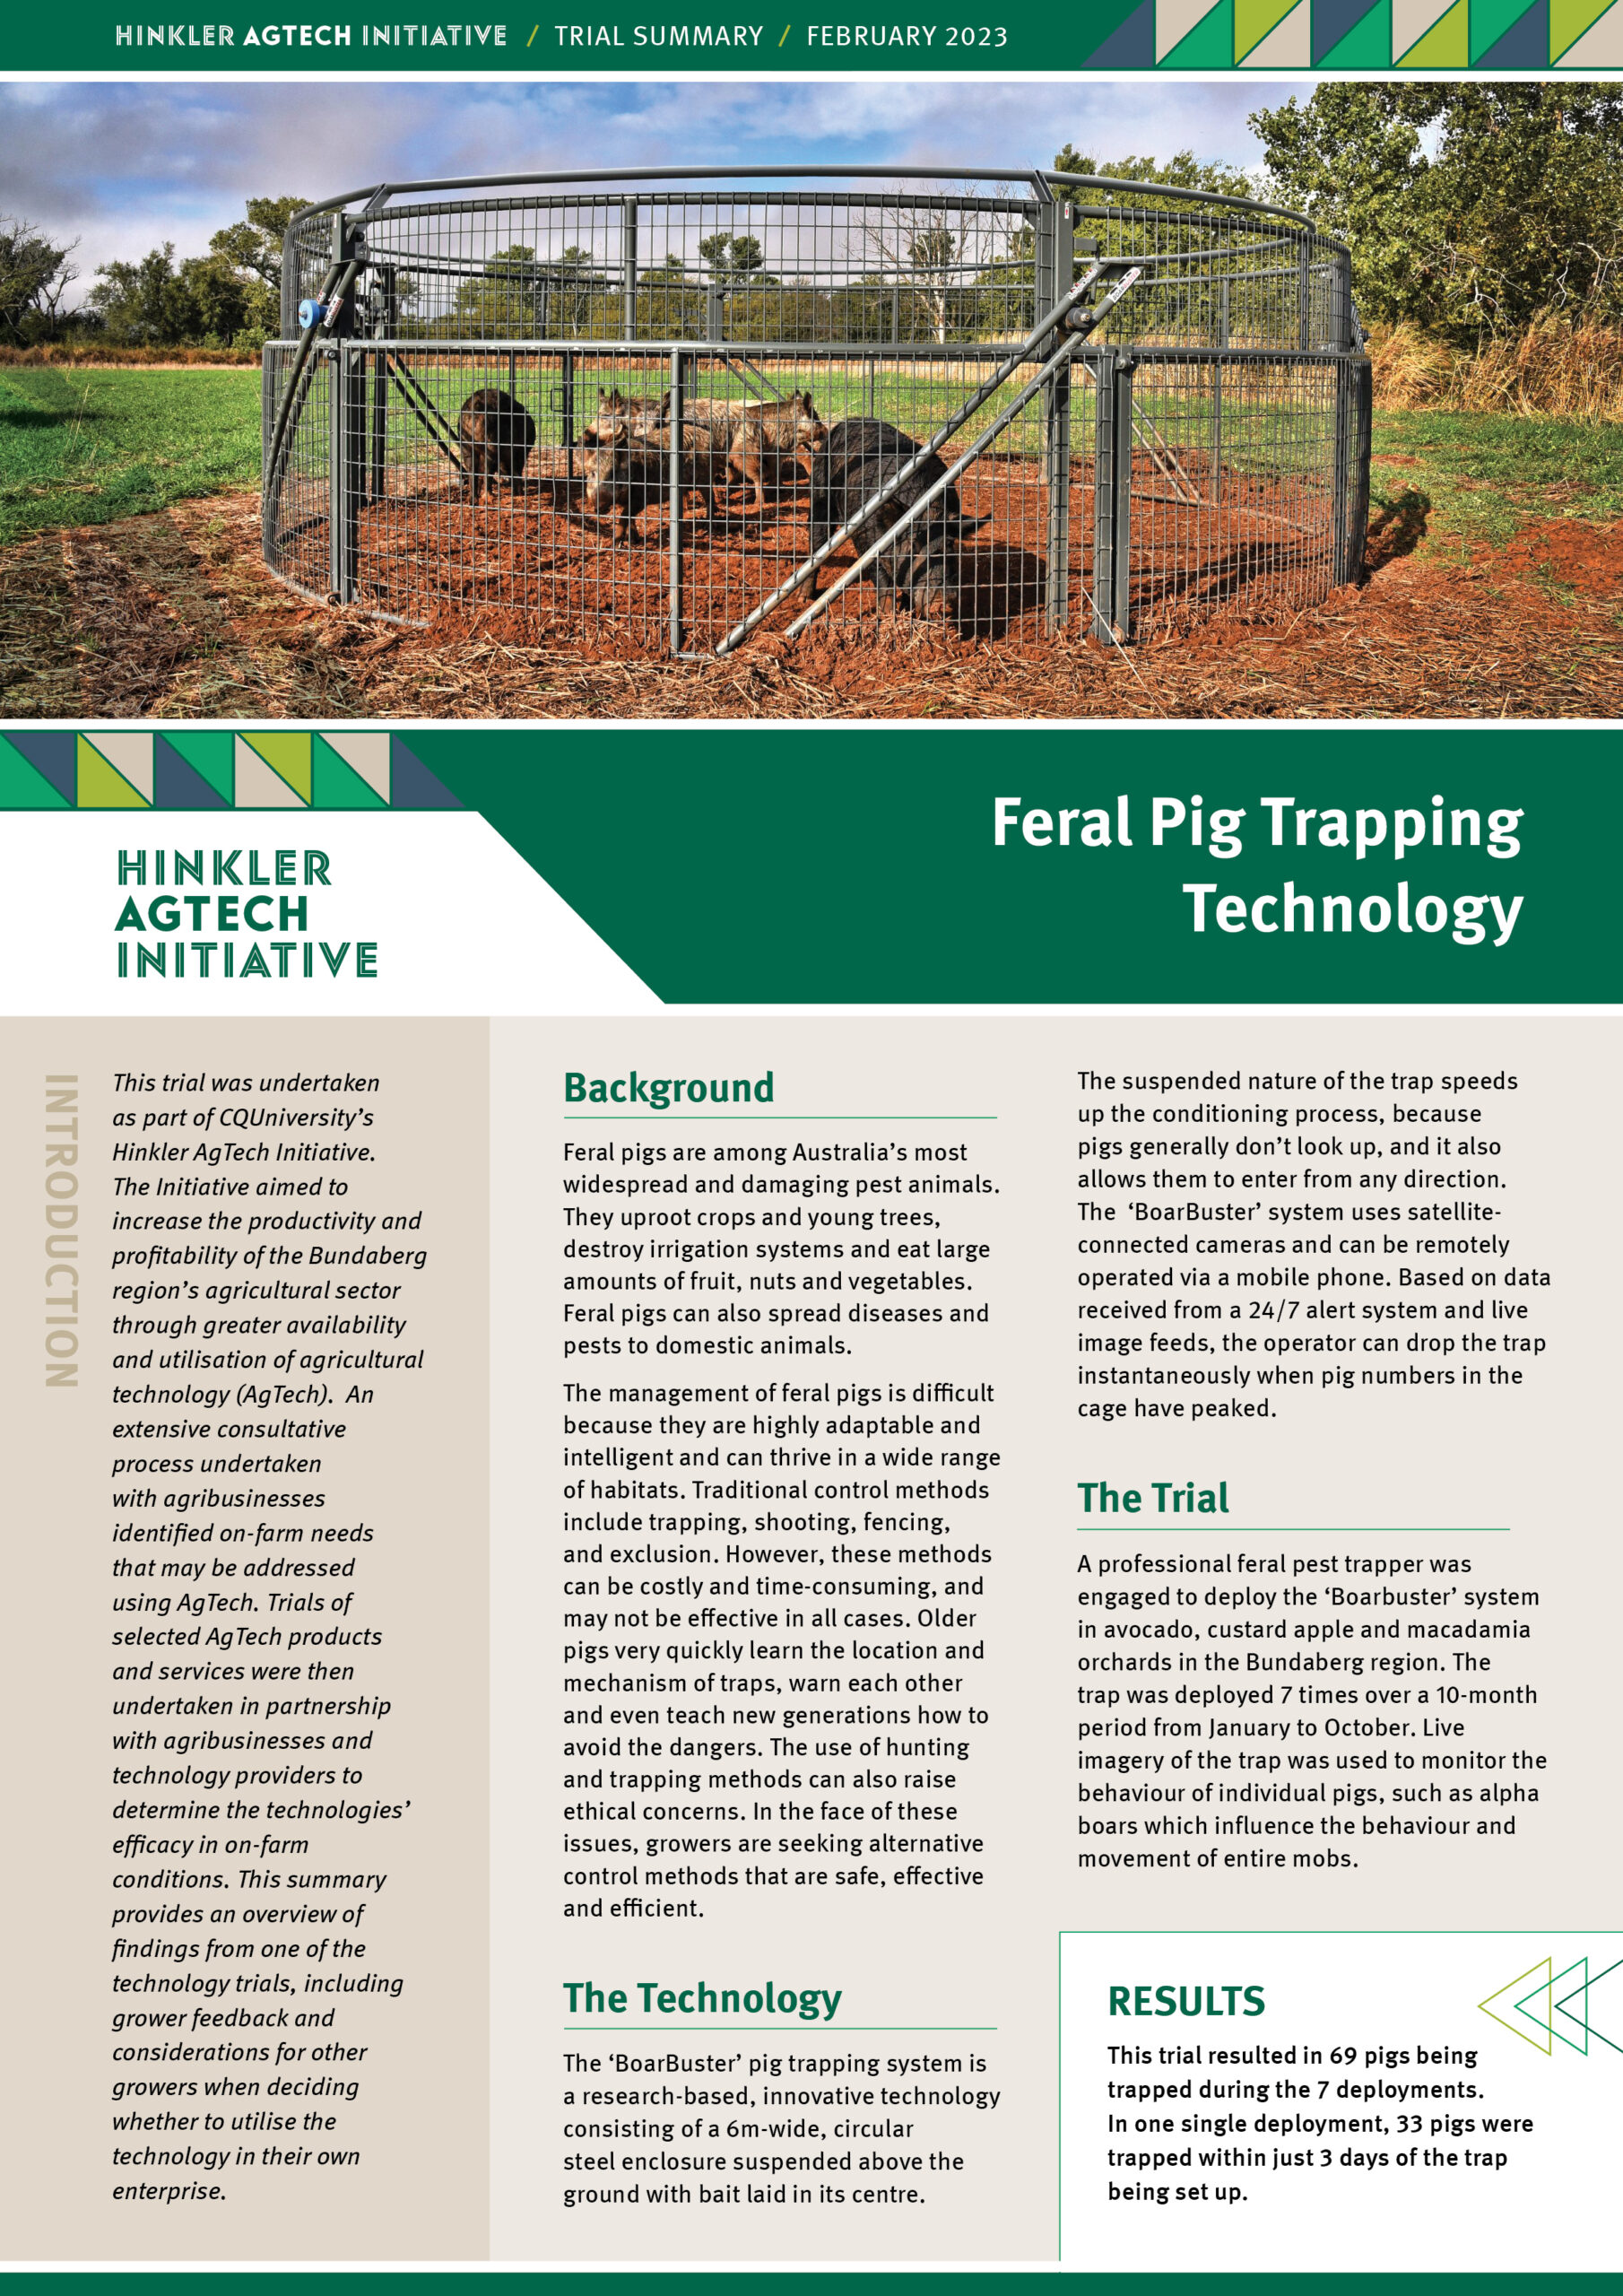 Feral Pig Trapping Technology